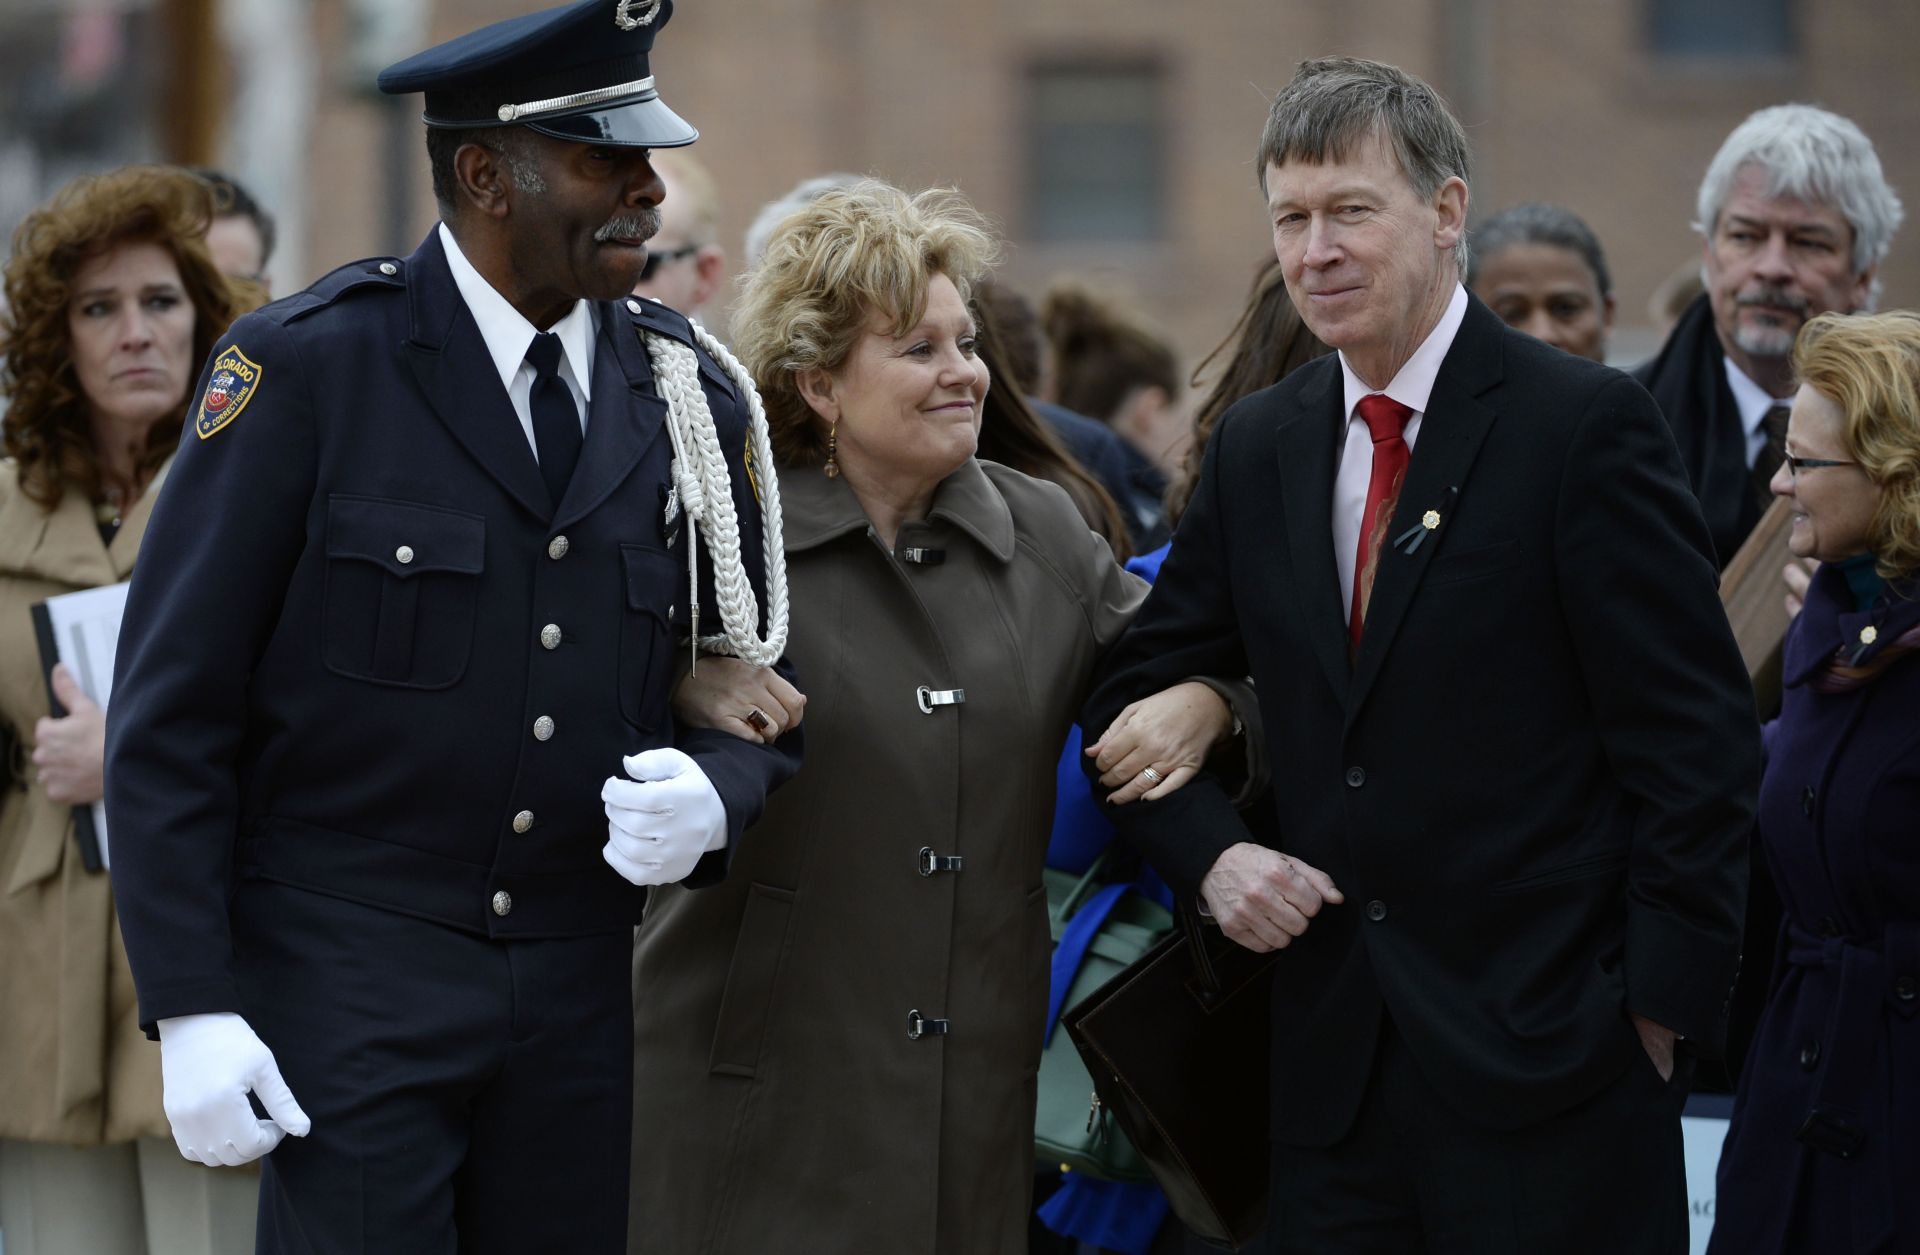 Lisa Clements (C), wife of fallen Department of Correction executive director, Tom Clements, cracks a half-smile as Colorado Department of Corrections Honor Guard member Harry Campbell (L) and Colorado Gov. John Hickenlooper escort her away from a memorial event in Canon City, Colorado, on March 15, 2014.